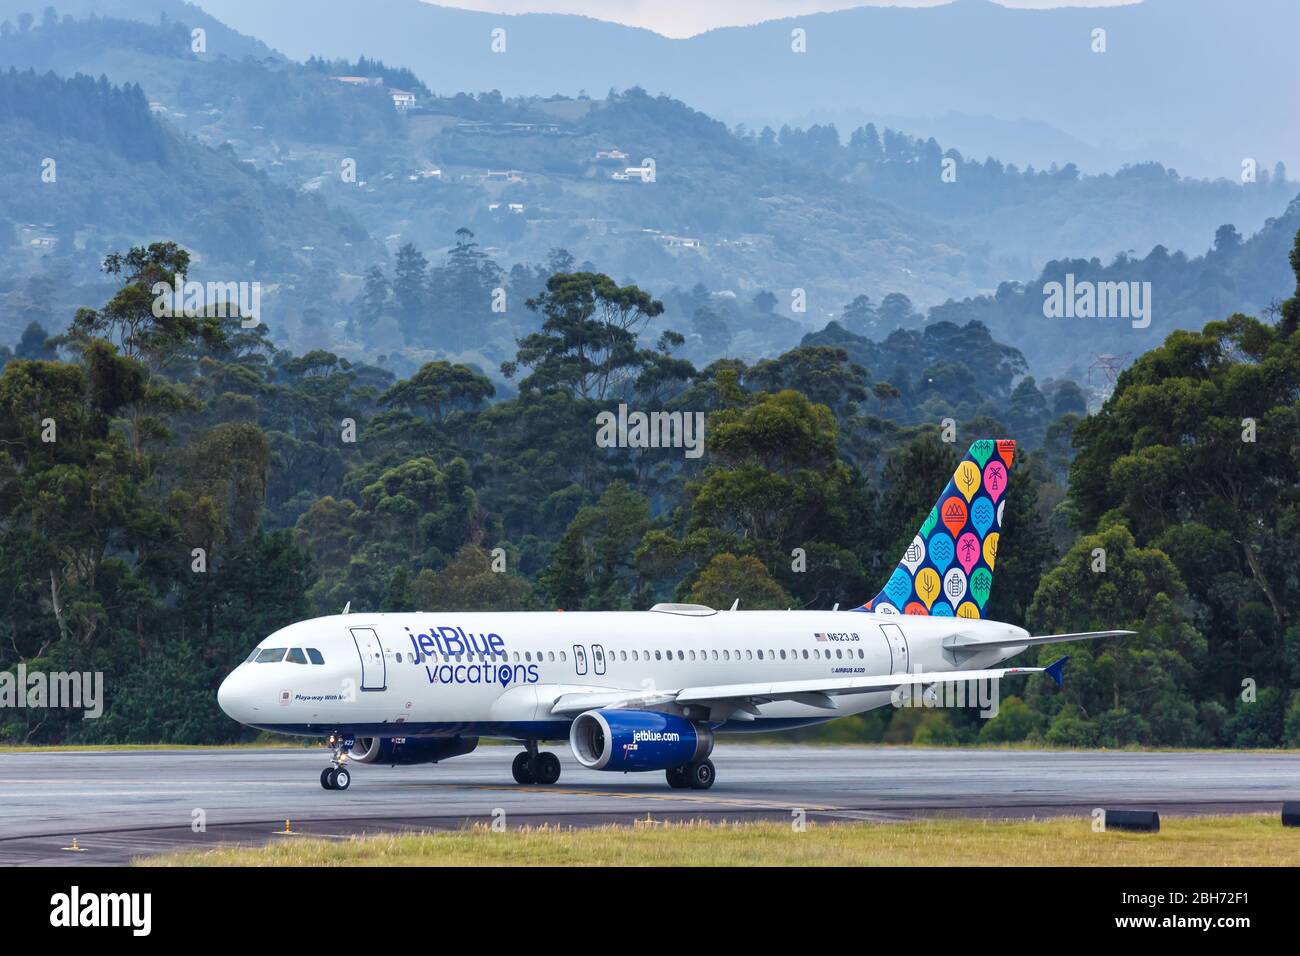 Medellin, Colombia – January 27, 2019: JetBlue Airbus A320 airplane at Medellin airport (MDE) in Colombia. Stock Photo